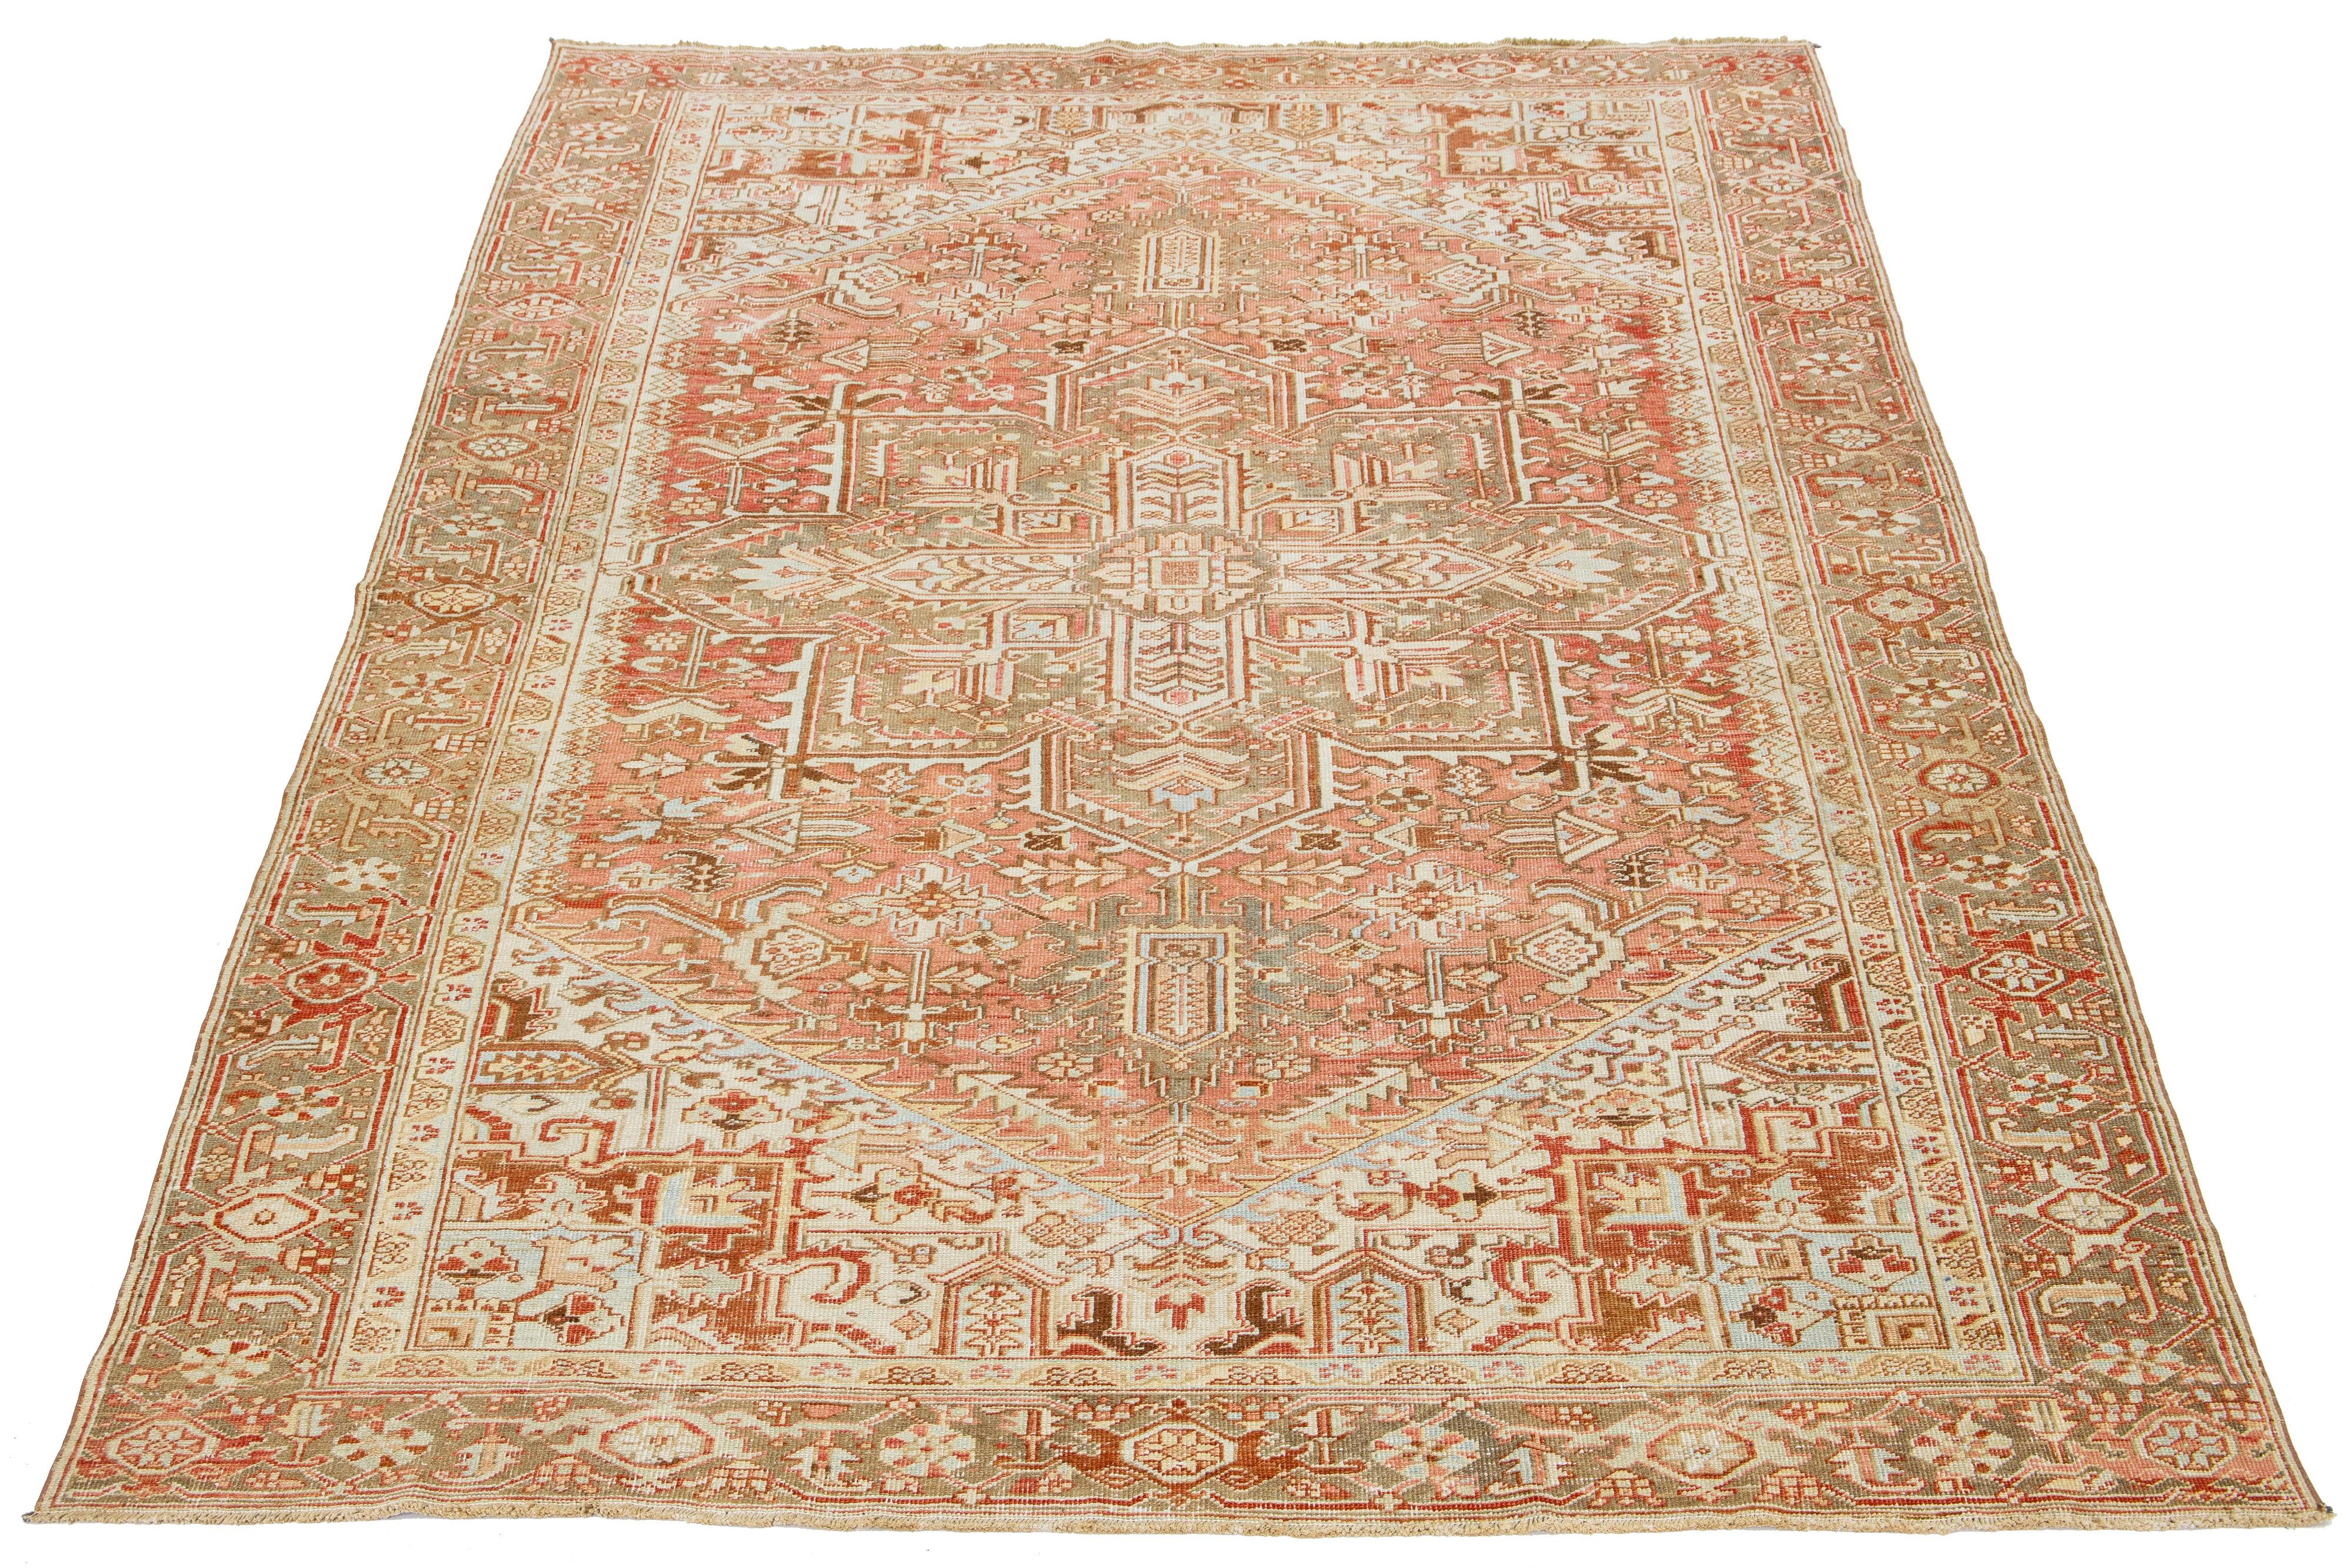 This antique Persian Heriz rug is made with hand-knotted wool. The rust-orange field showcases a captivating allover pattern adorned with beige, peach, brown, and blue shades.

This rug measures 7'11' x 11'9